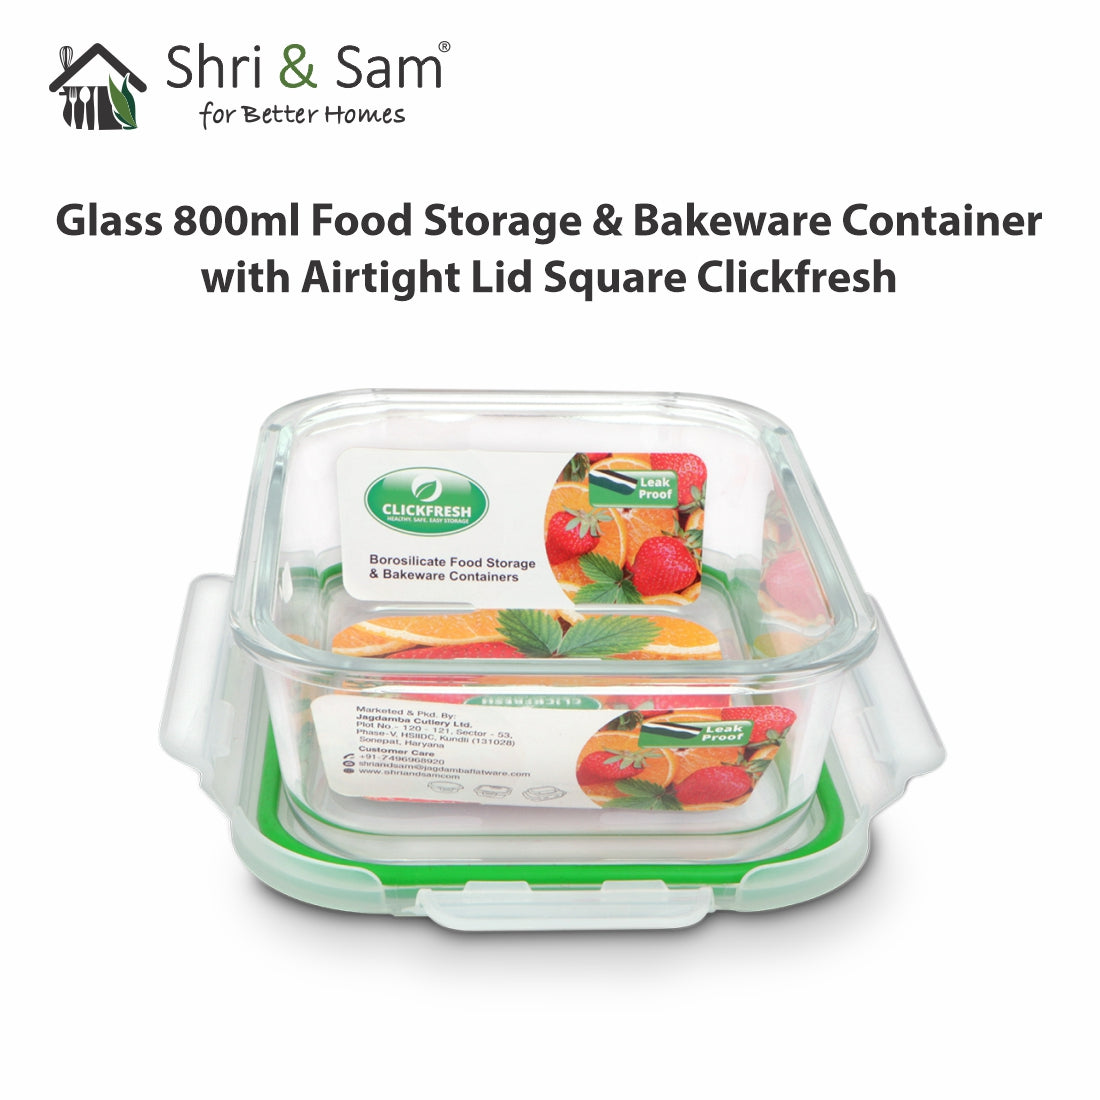 Glass 800ml Food Storage & Bakeware Container with Airtight Lid Square Clickfresh